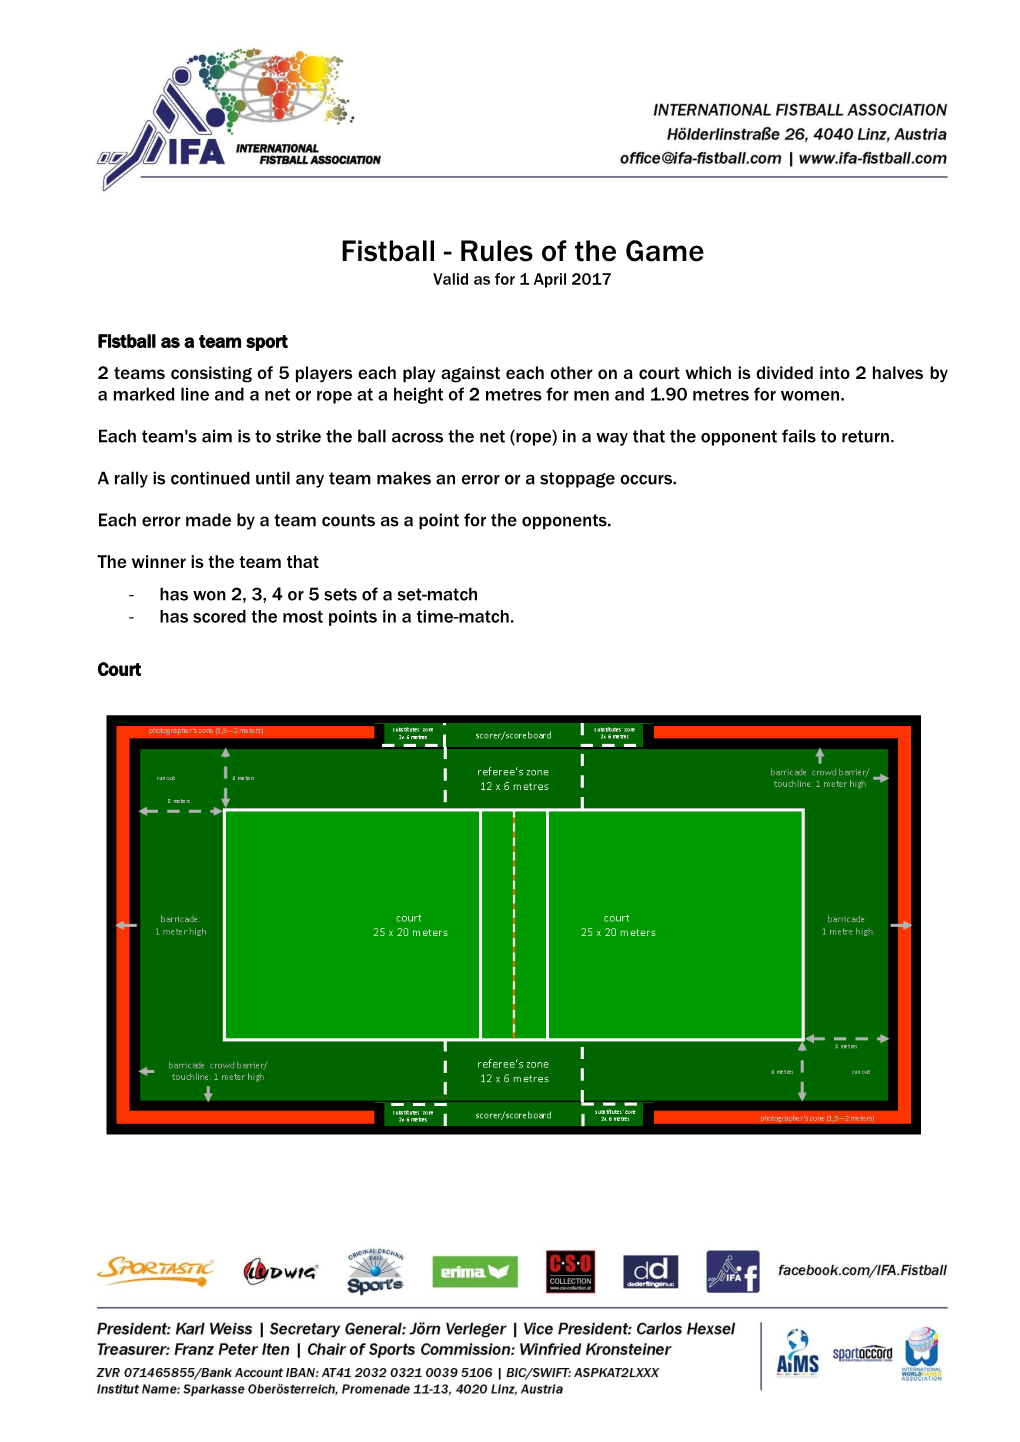 Fistball - Rules of the Game Valid As for 1 April 2017